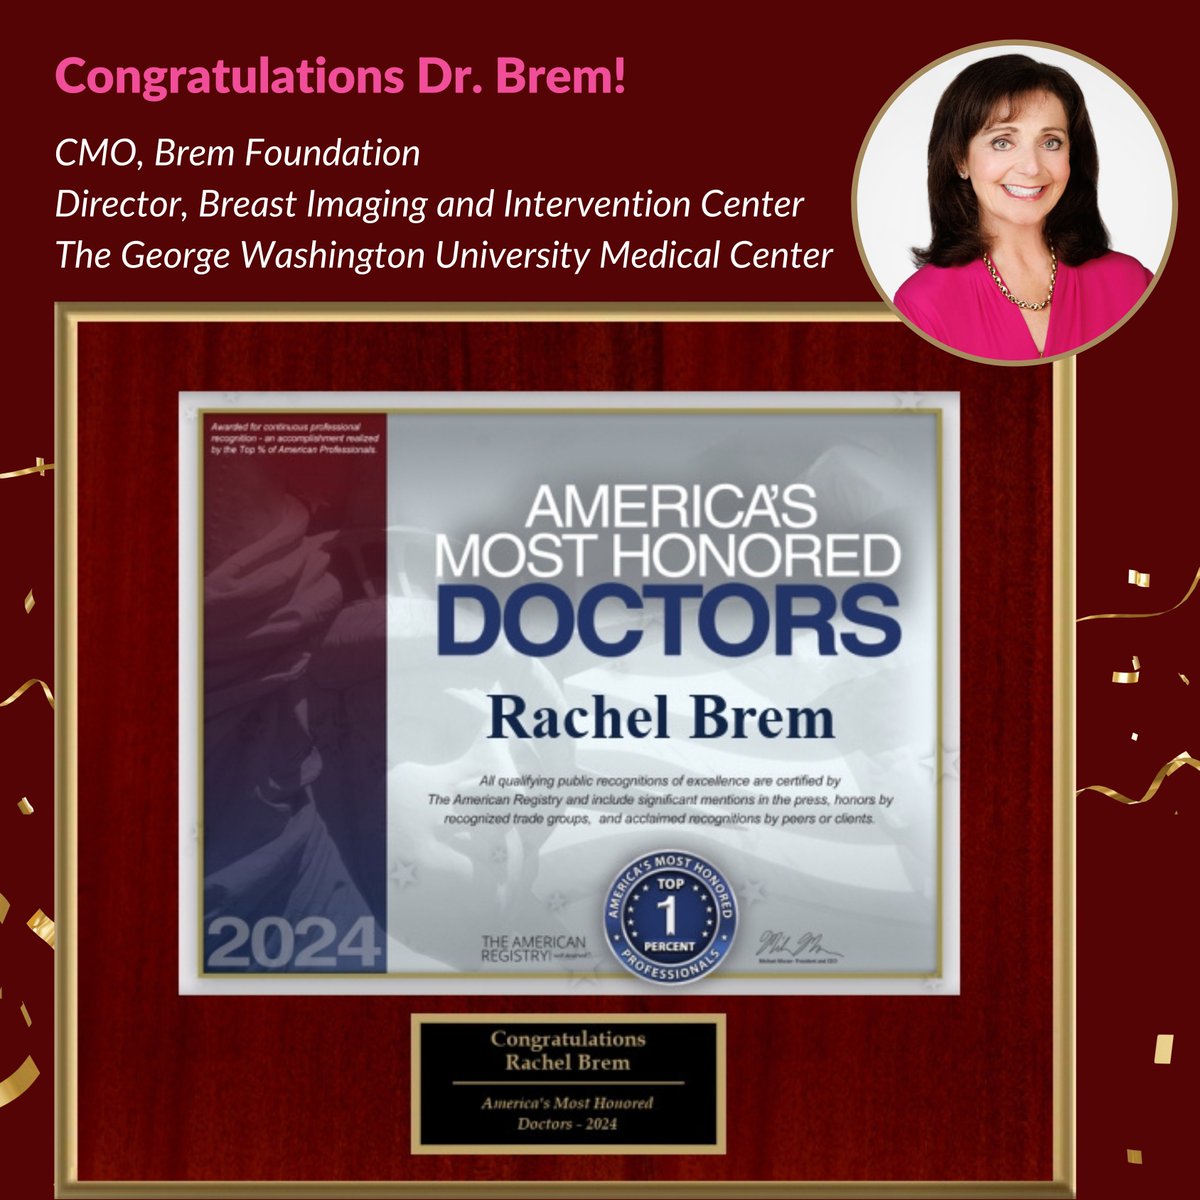 A huge congratulations to @DrRachelBrem, our CMO, for her recognition by The American Registry as one of America’s Most Honored Doctors. This accomplishment places her in the top 1% of doctors nationwide, acknowledging her exceptional impact!

#TopDoctors
#LeadersInHealthcare